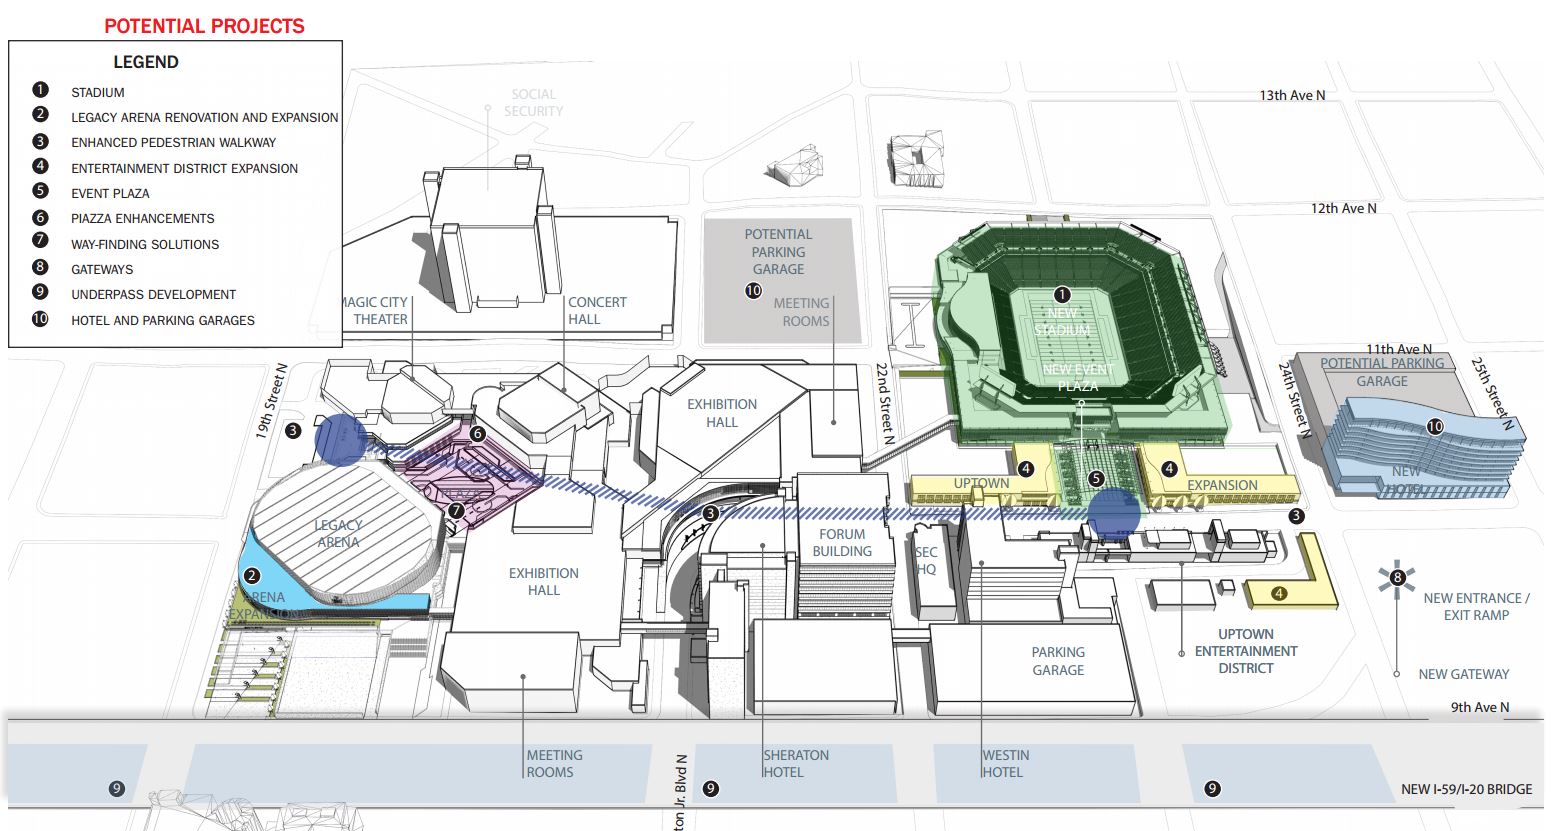 The revisions to the BJCC master plan would add a new open-air stadium, an expanded Uptown entertainment district and changes to the existing complex. (Populous)